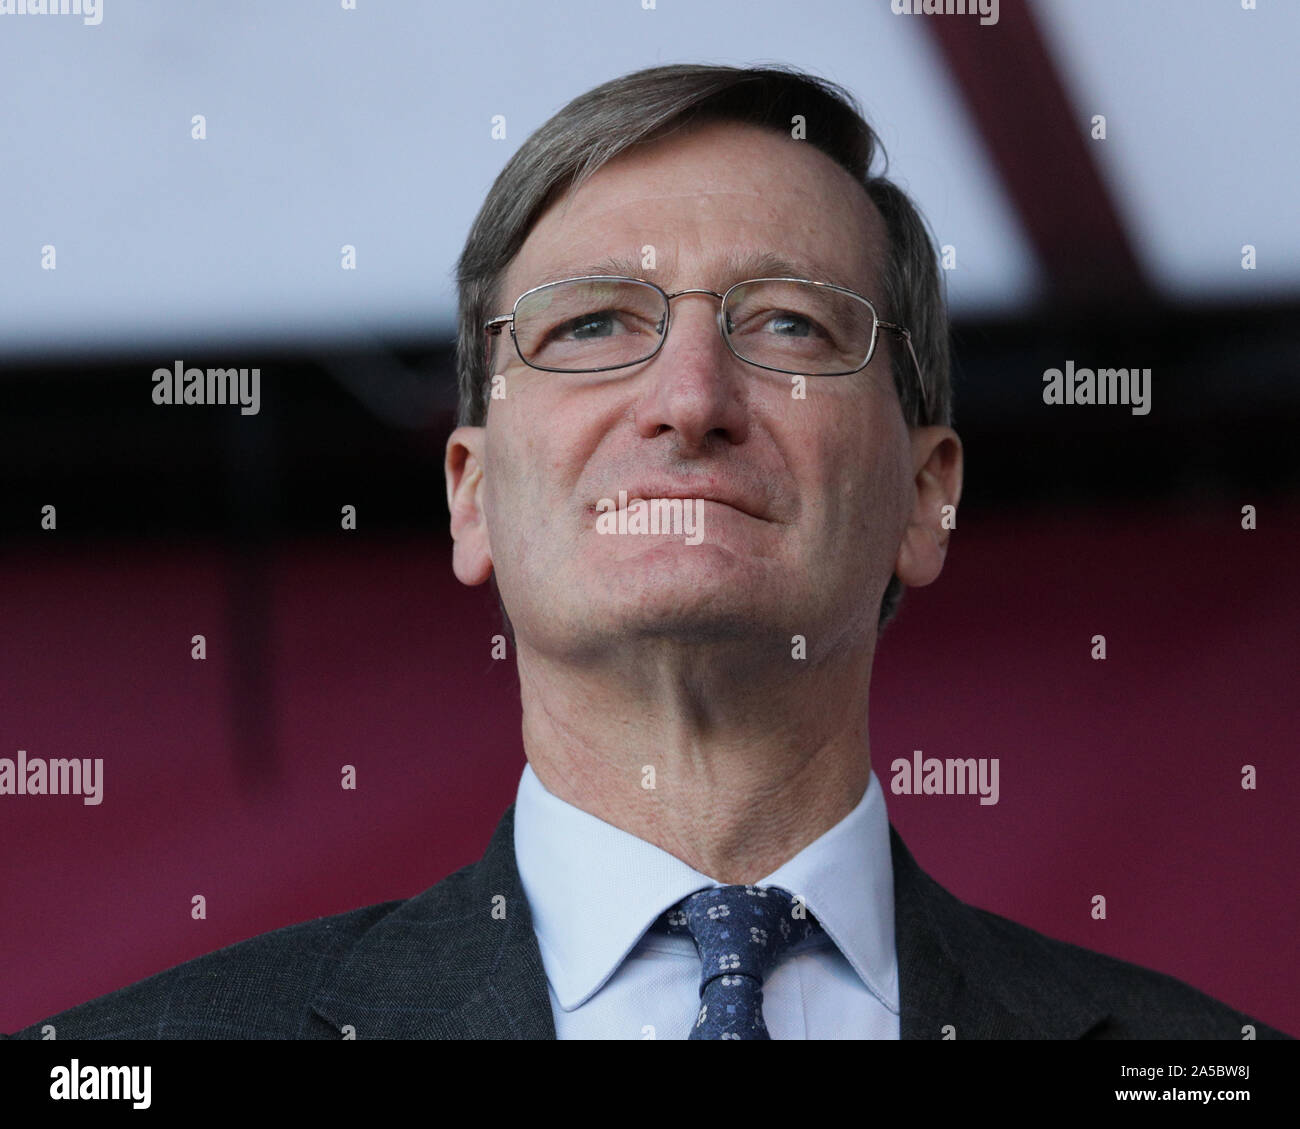 London, UK, 19 Oct 2019. Dominic Grieve, QC, MP, Conservative. Politicians take to the main stage on Parliament Square where thousands have assembled as part of the People's Vote March. The stage is outside the Houses of Parliament where MPs were discussing Brexit. Credit: Imageplotter/Alamy Live News Stock Photo